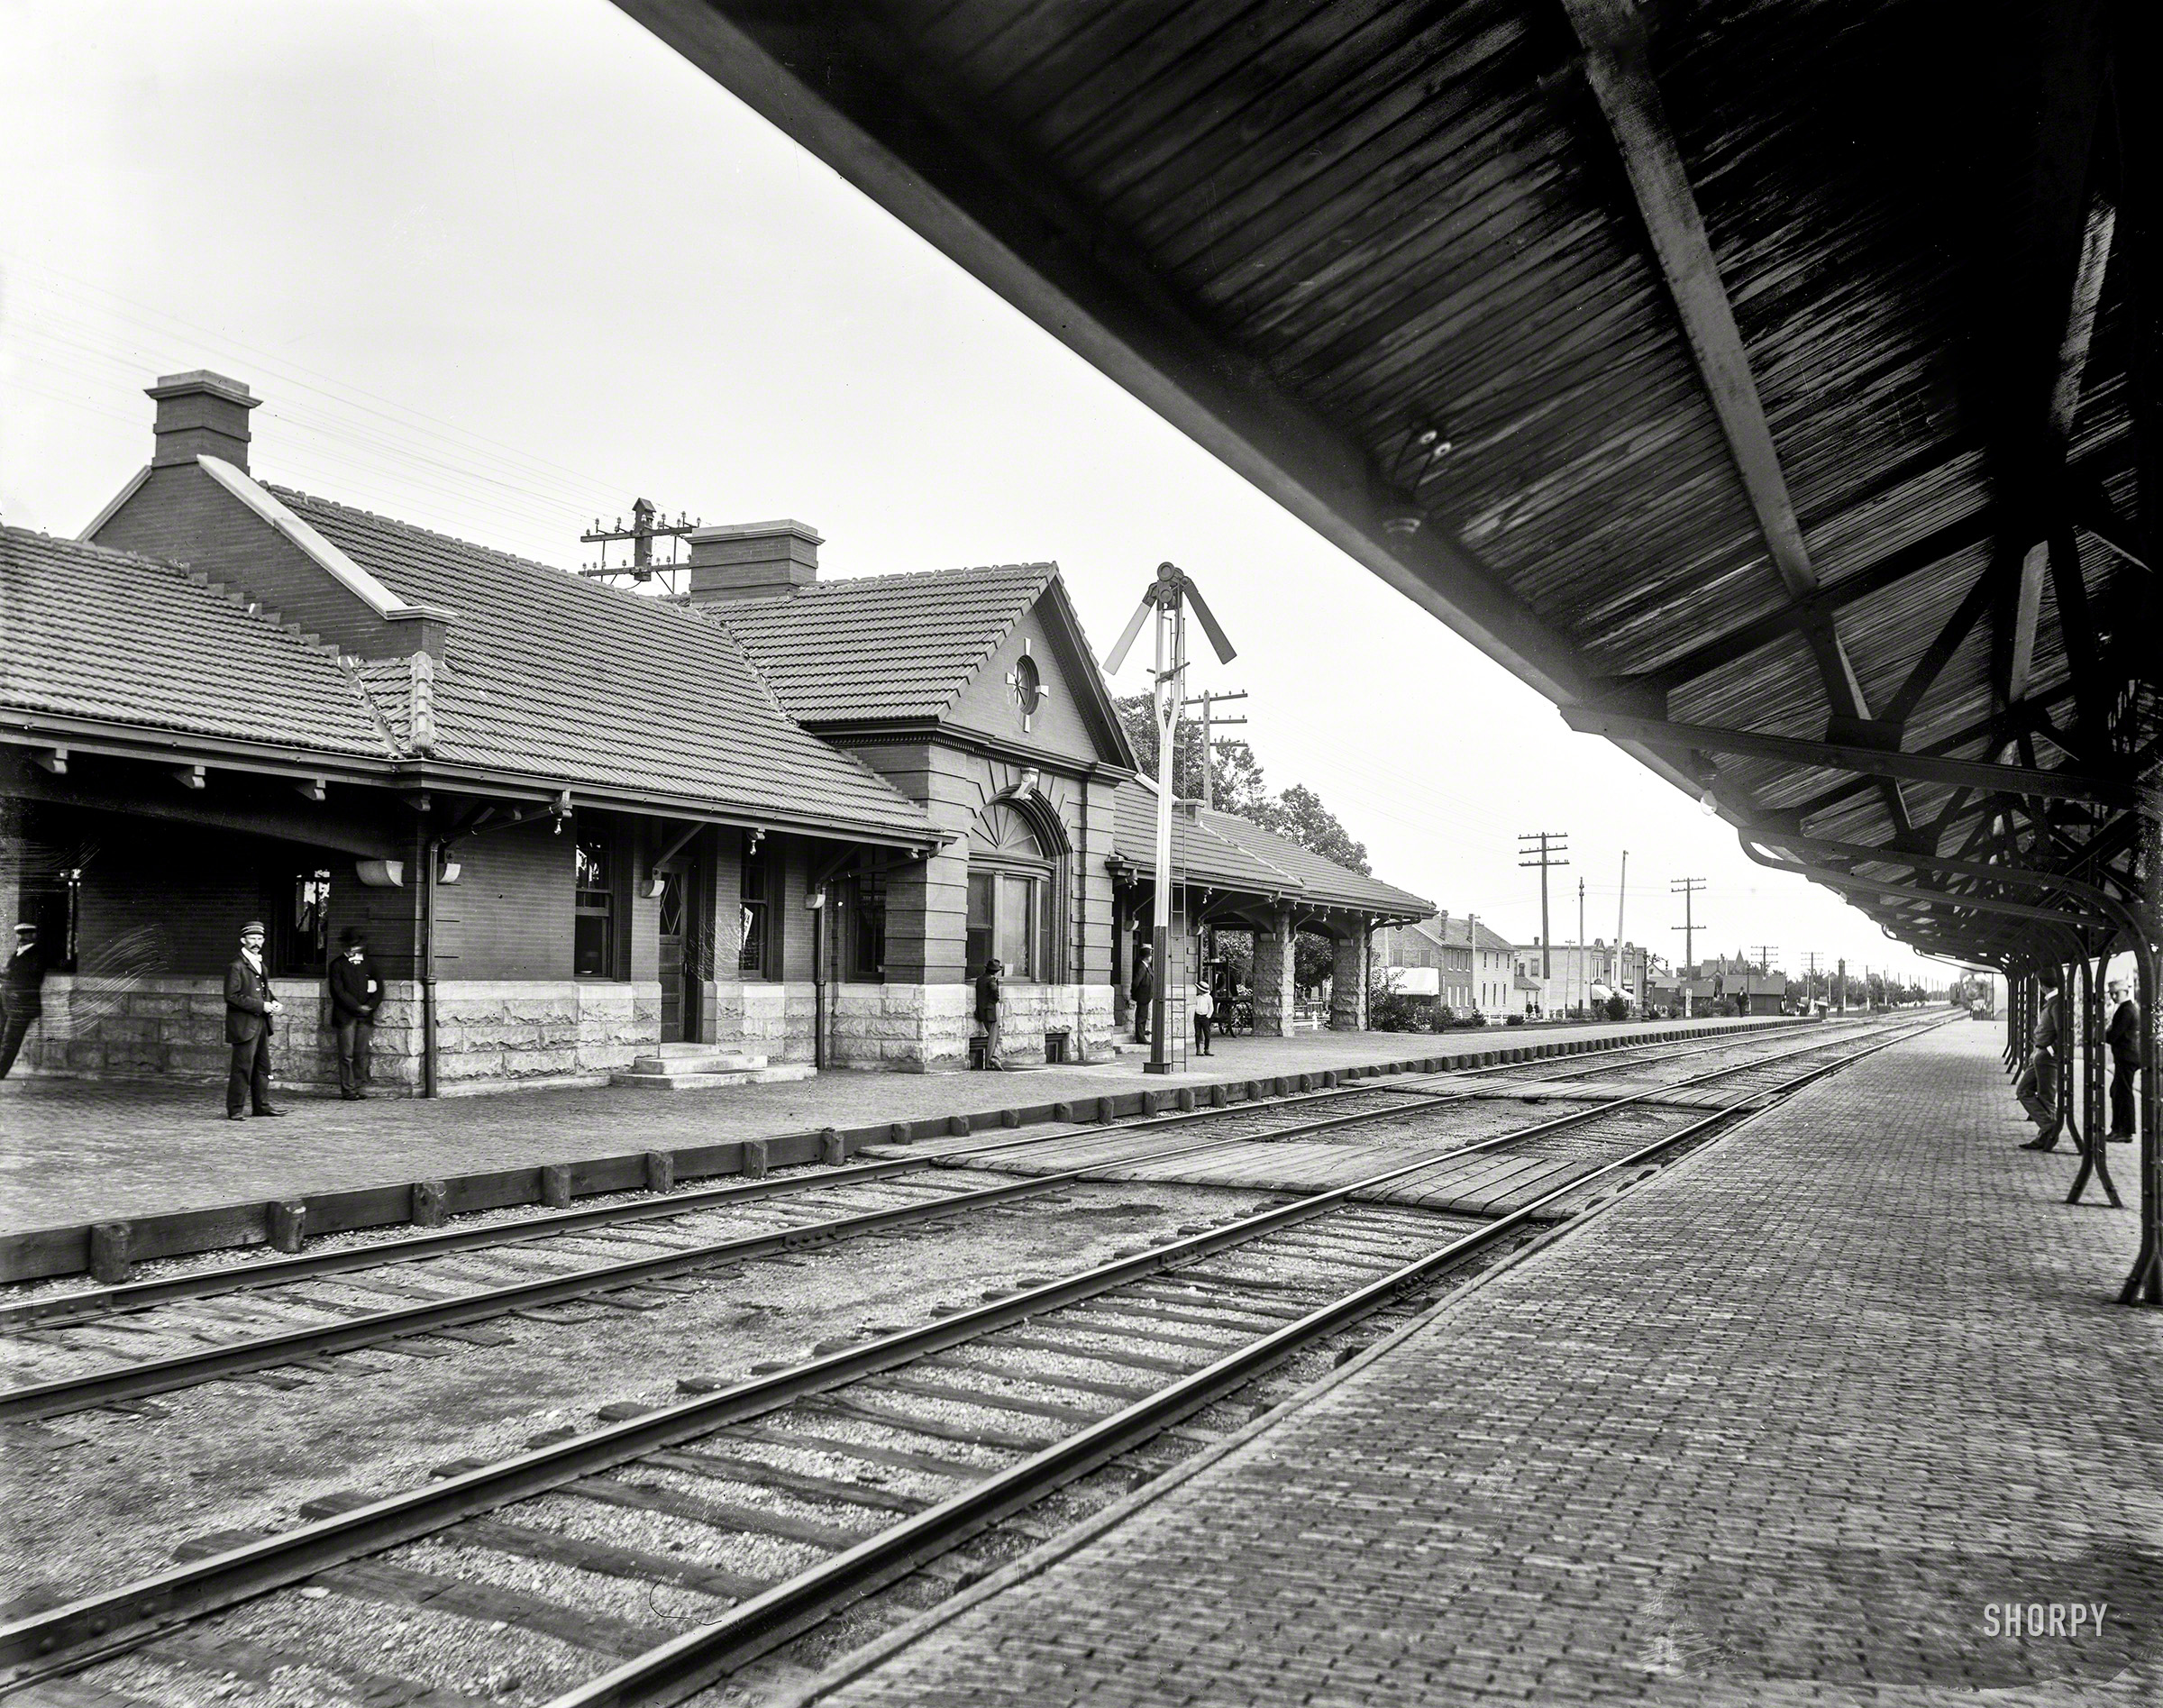 Circa 1899. "Chicago & North Western Railway station, Elmhurst, Ill." 8x10 inch dry plate glass negative, Detroit Publishing Company. View full size.